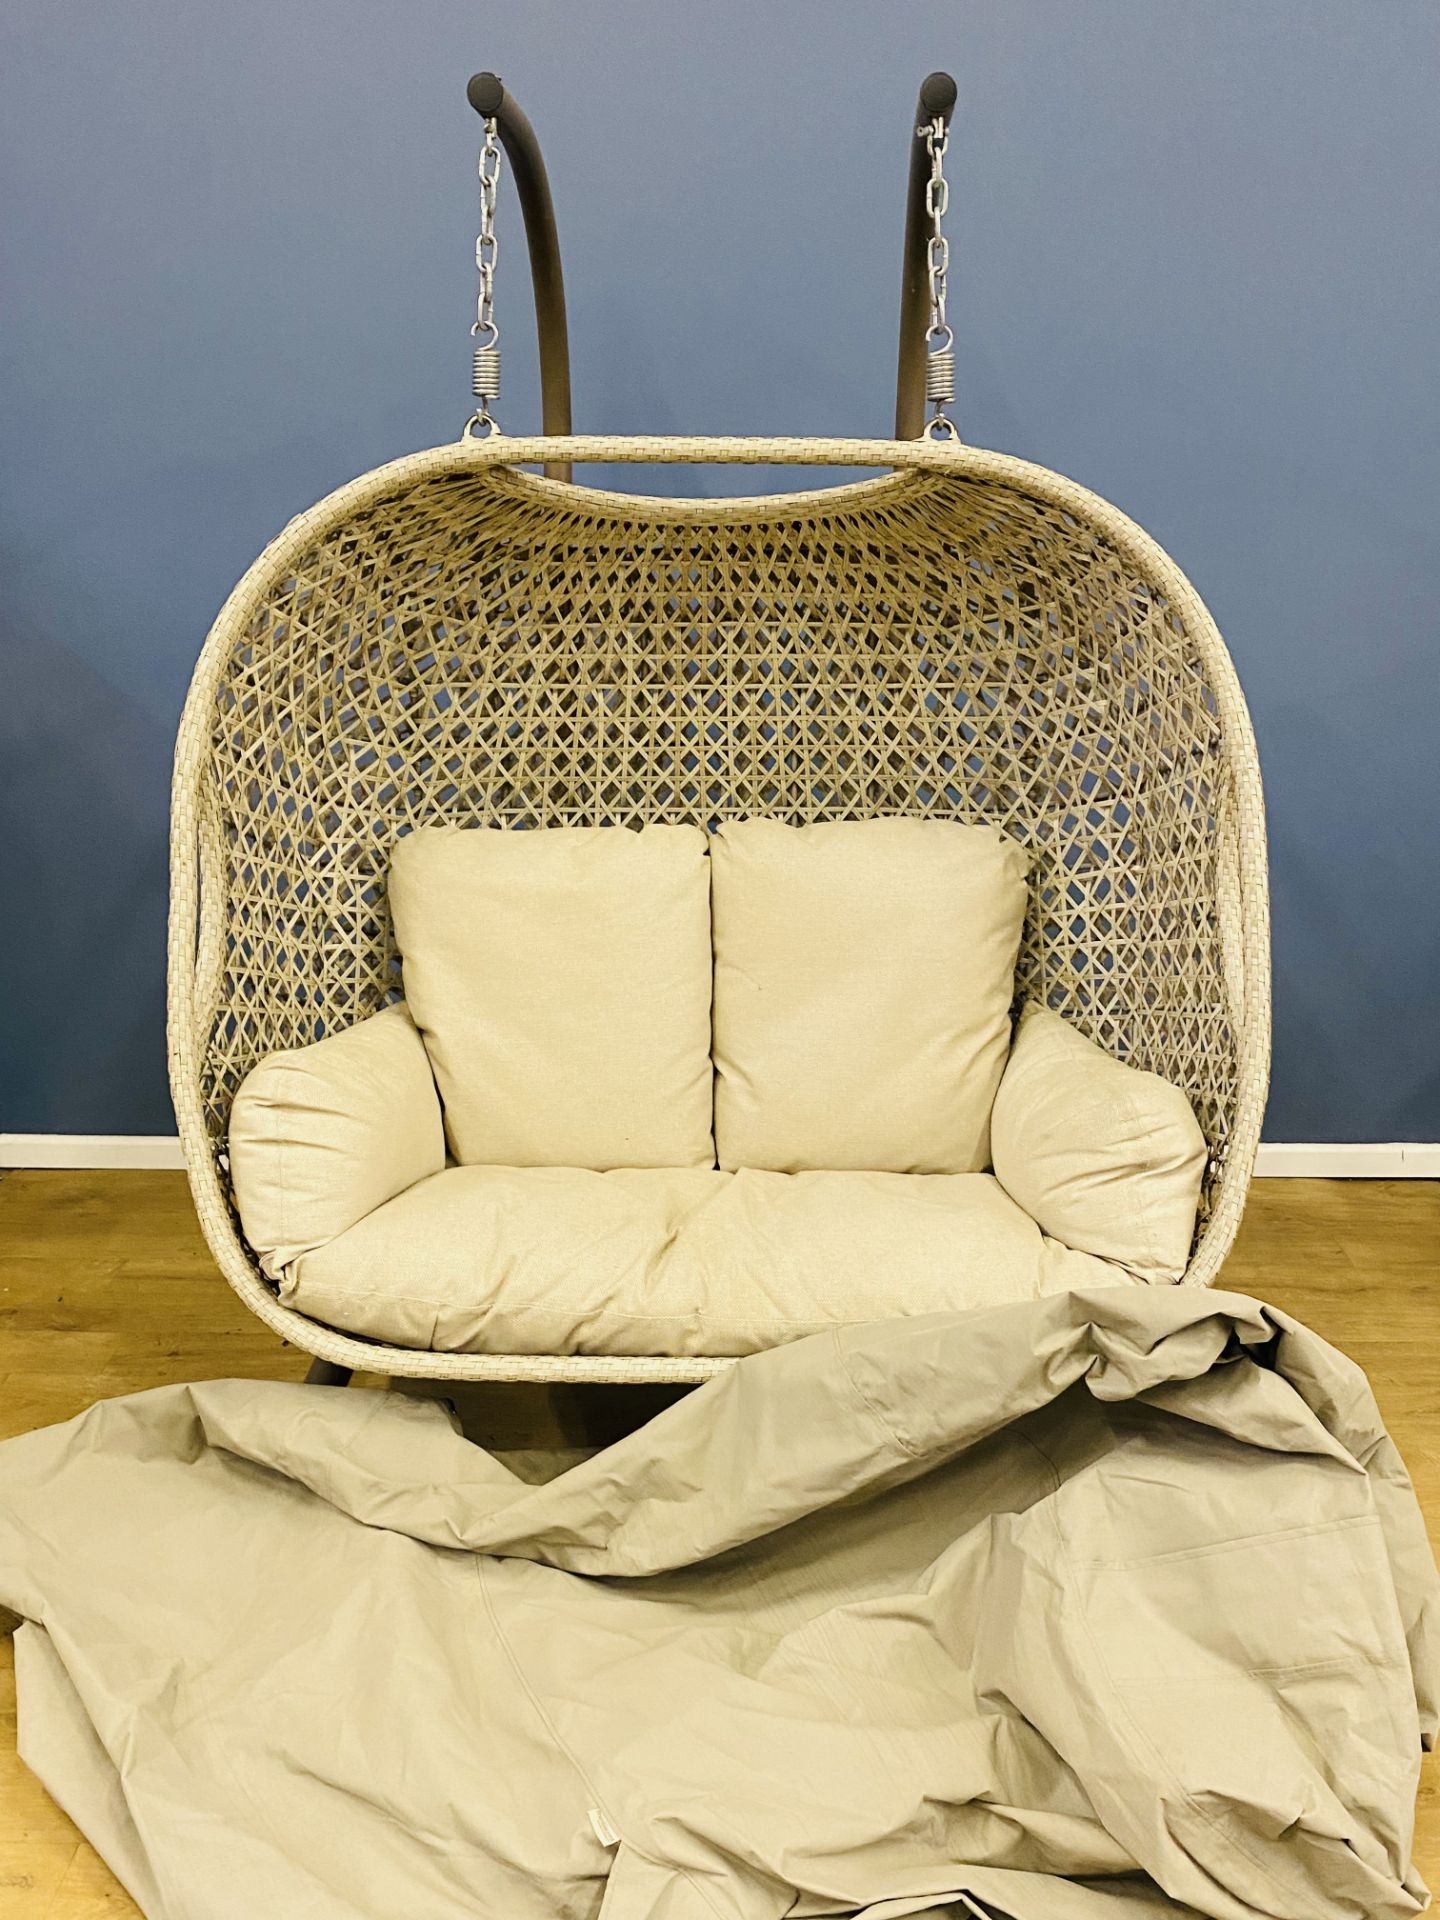 Faux rattan double egg style hanging chair - Image 2 of 6